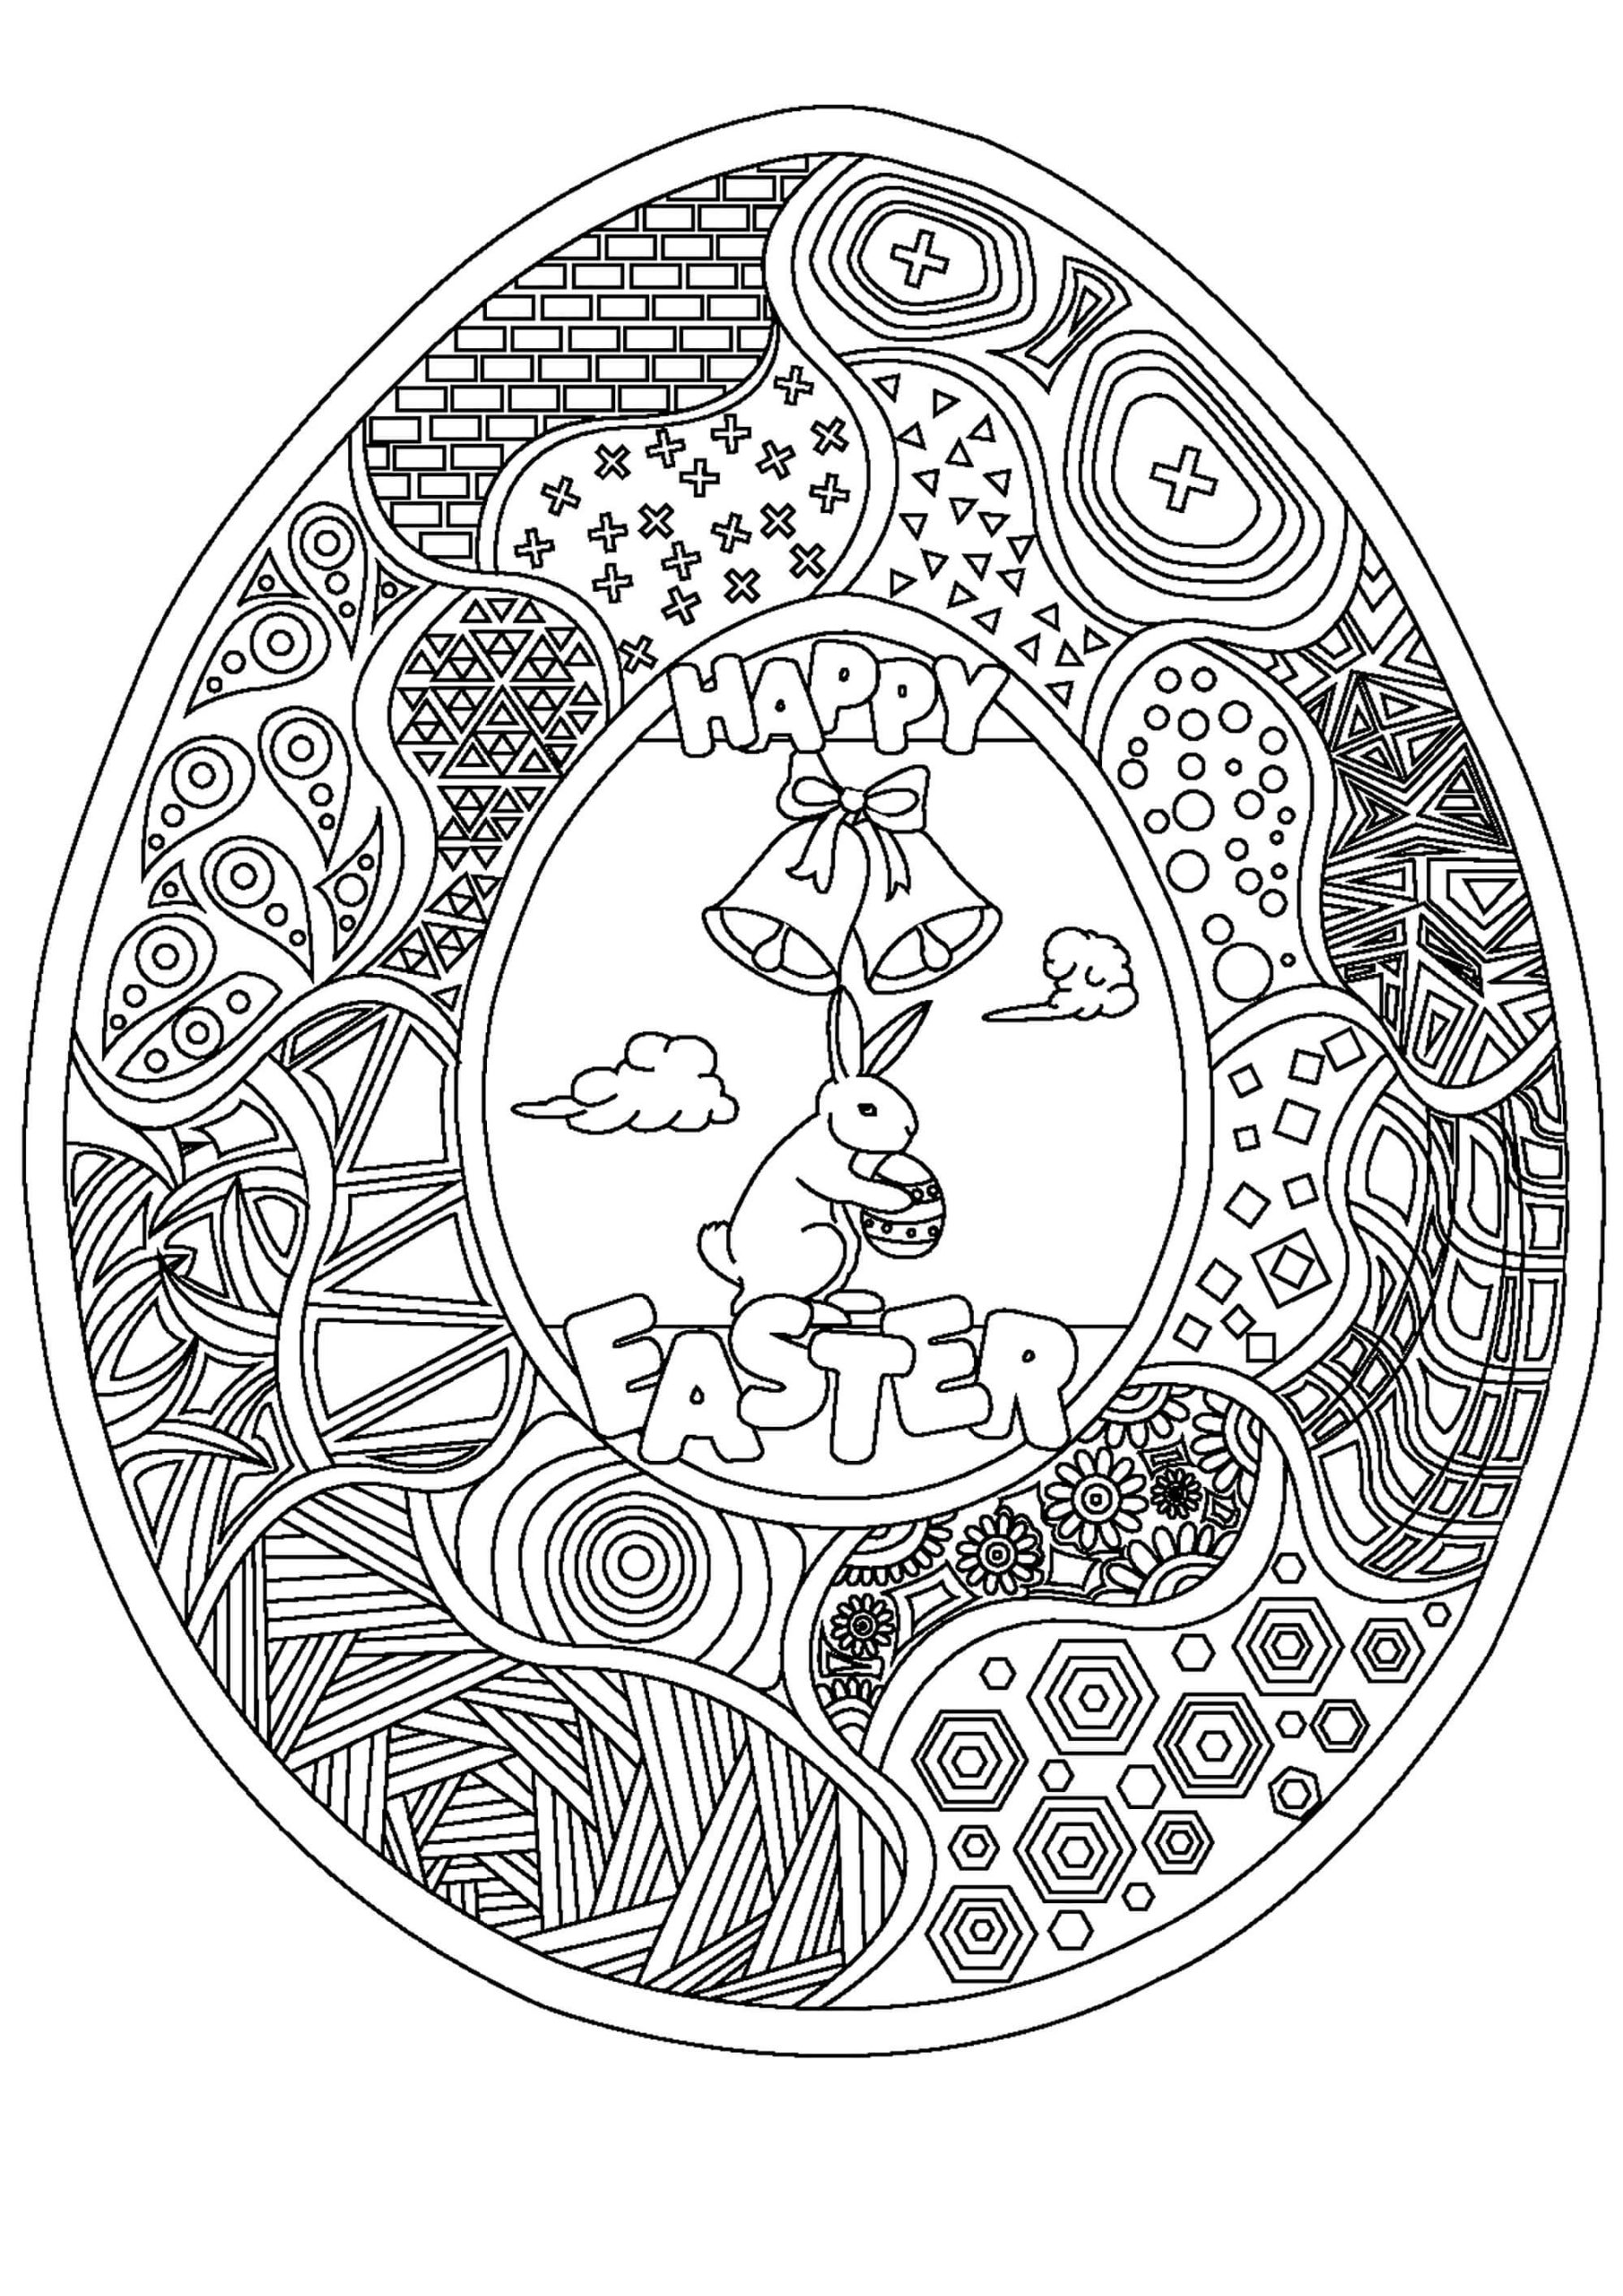 happy easter coloring pages for adults | adult easter coloring pages | creepy coloring pages for adults